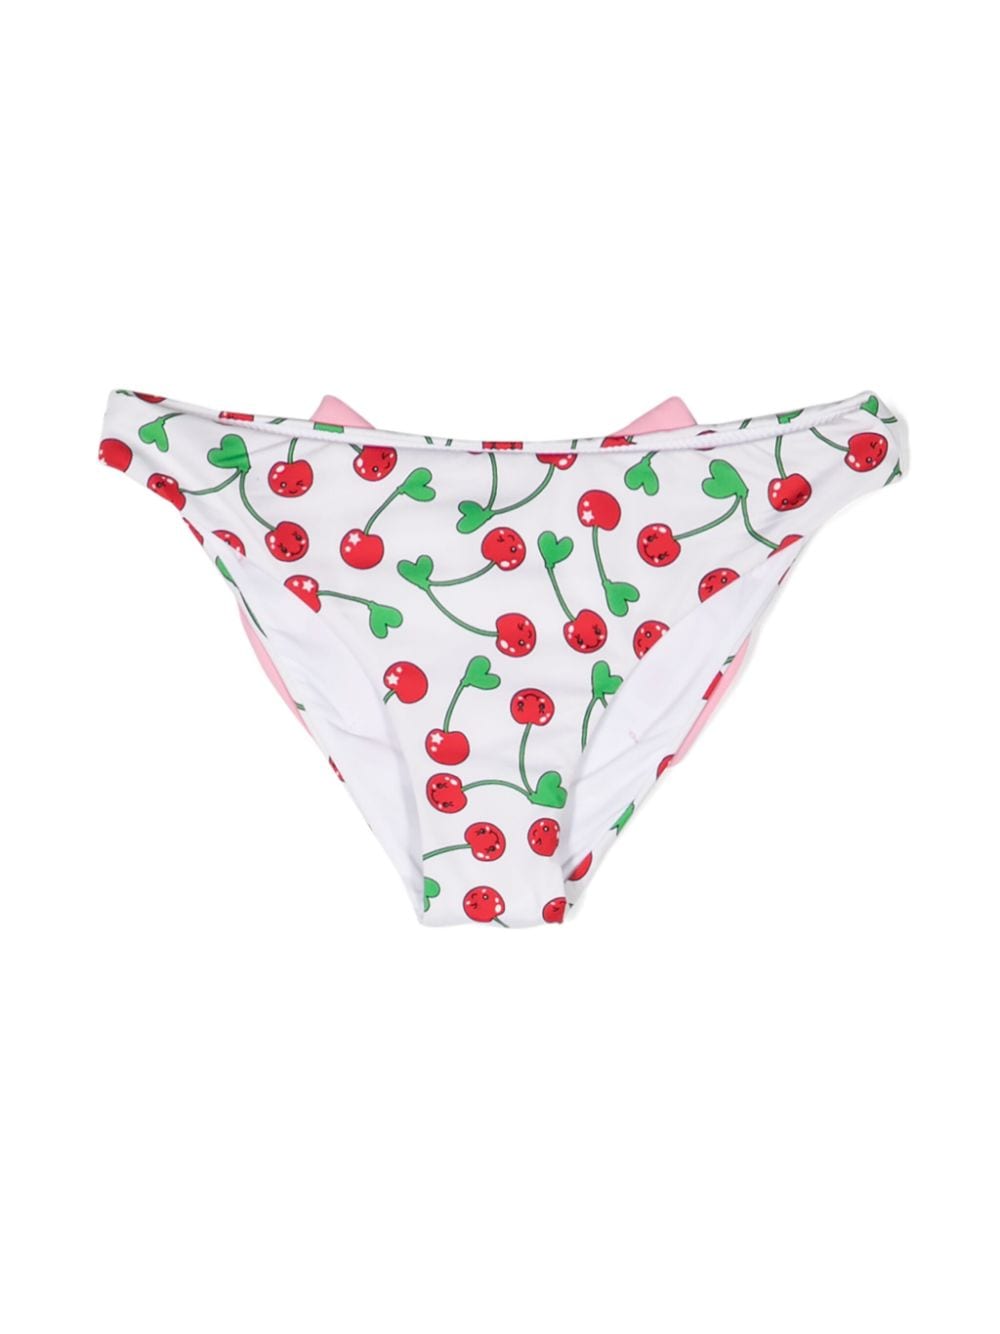 Multicolored briefs for girls with cherry